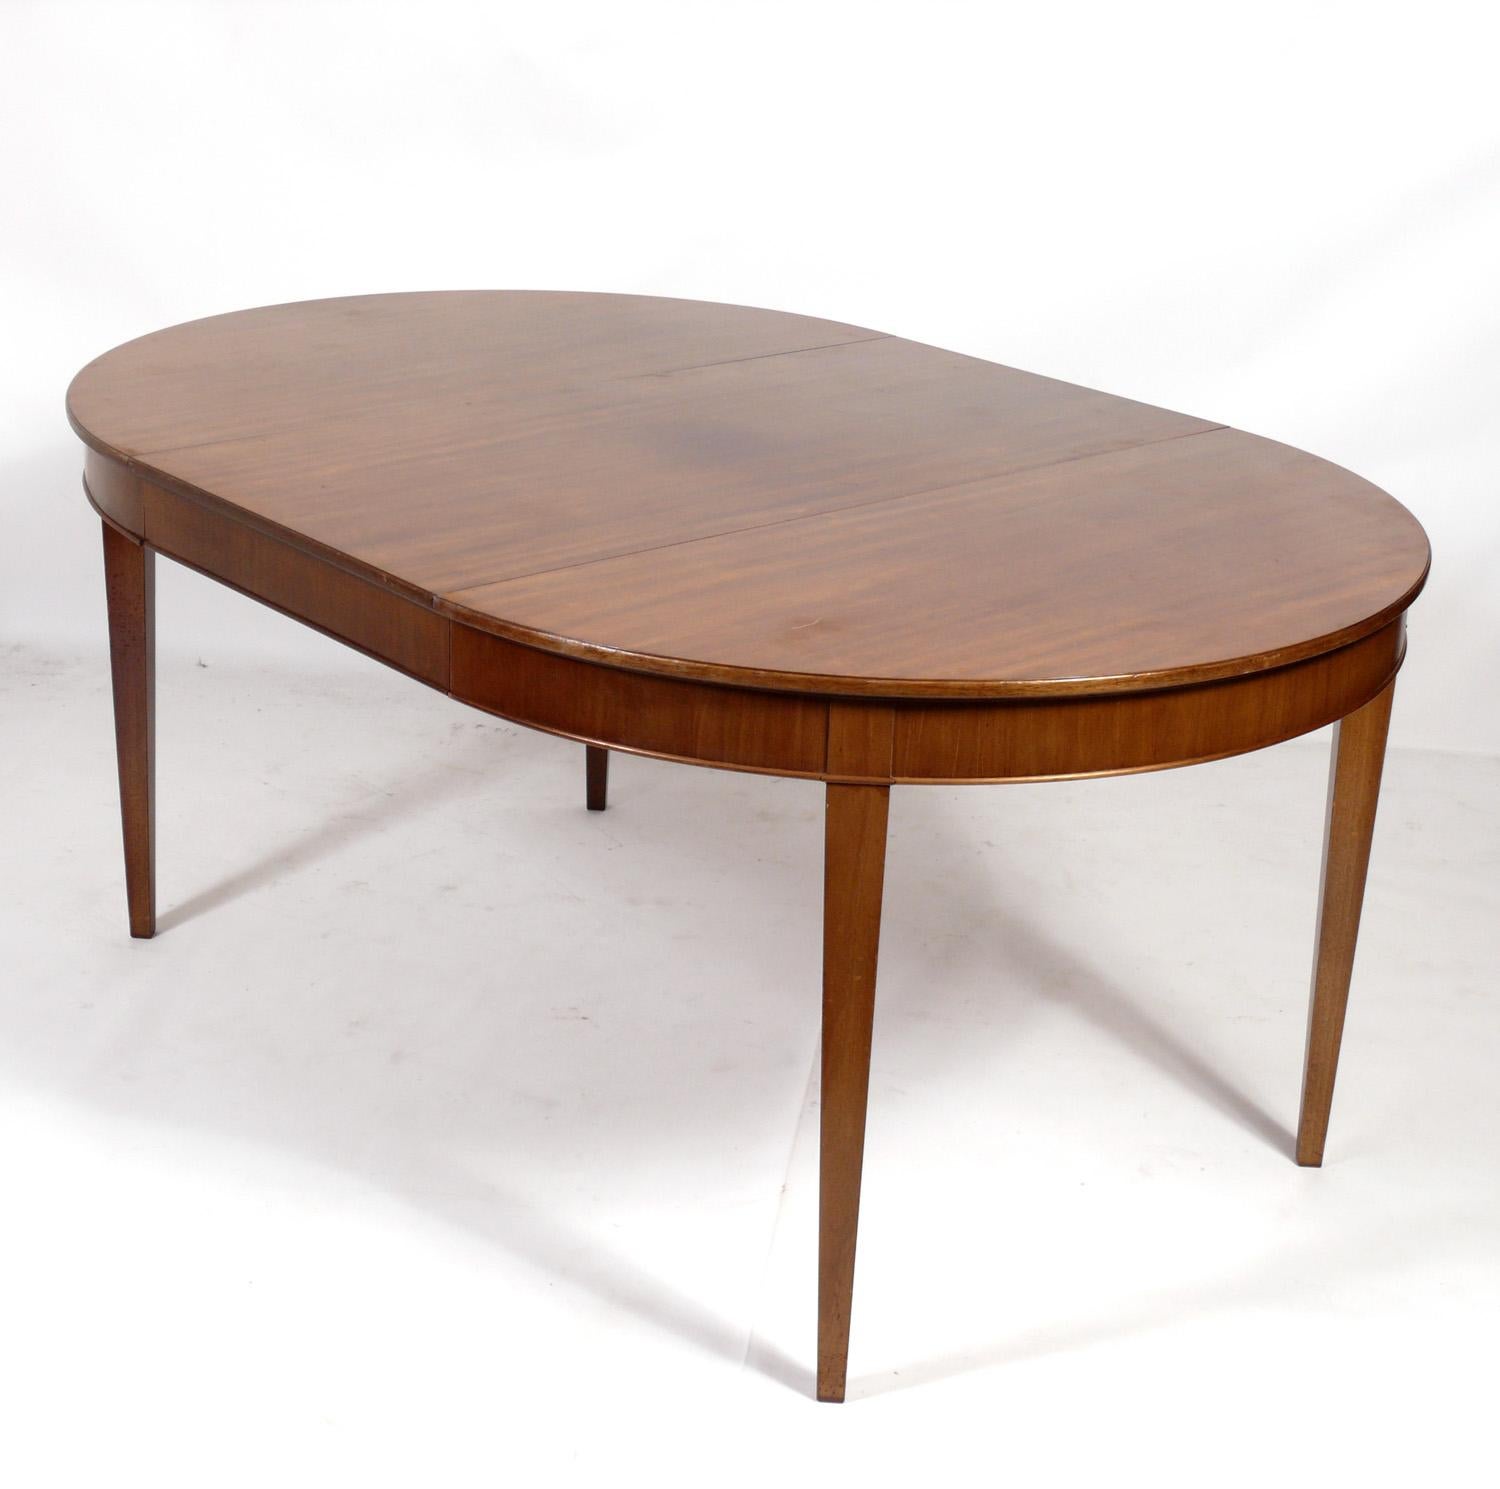 Danish Modern Mahogany dining table, designed by Frits Henningsen, Denmark, circa 1930s. This dining table is currently being refinished and the leaves will be re-veneered, as their veneer was missing when we purchased the set. It expands from a